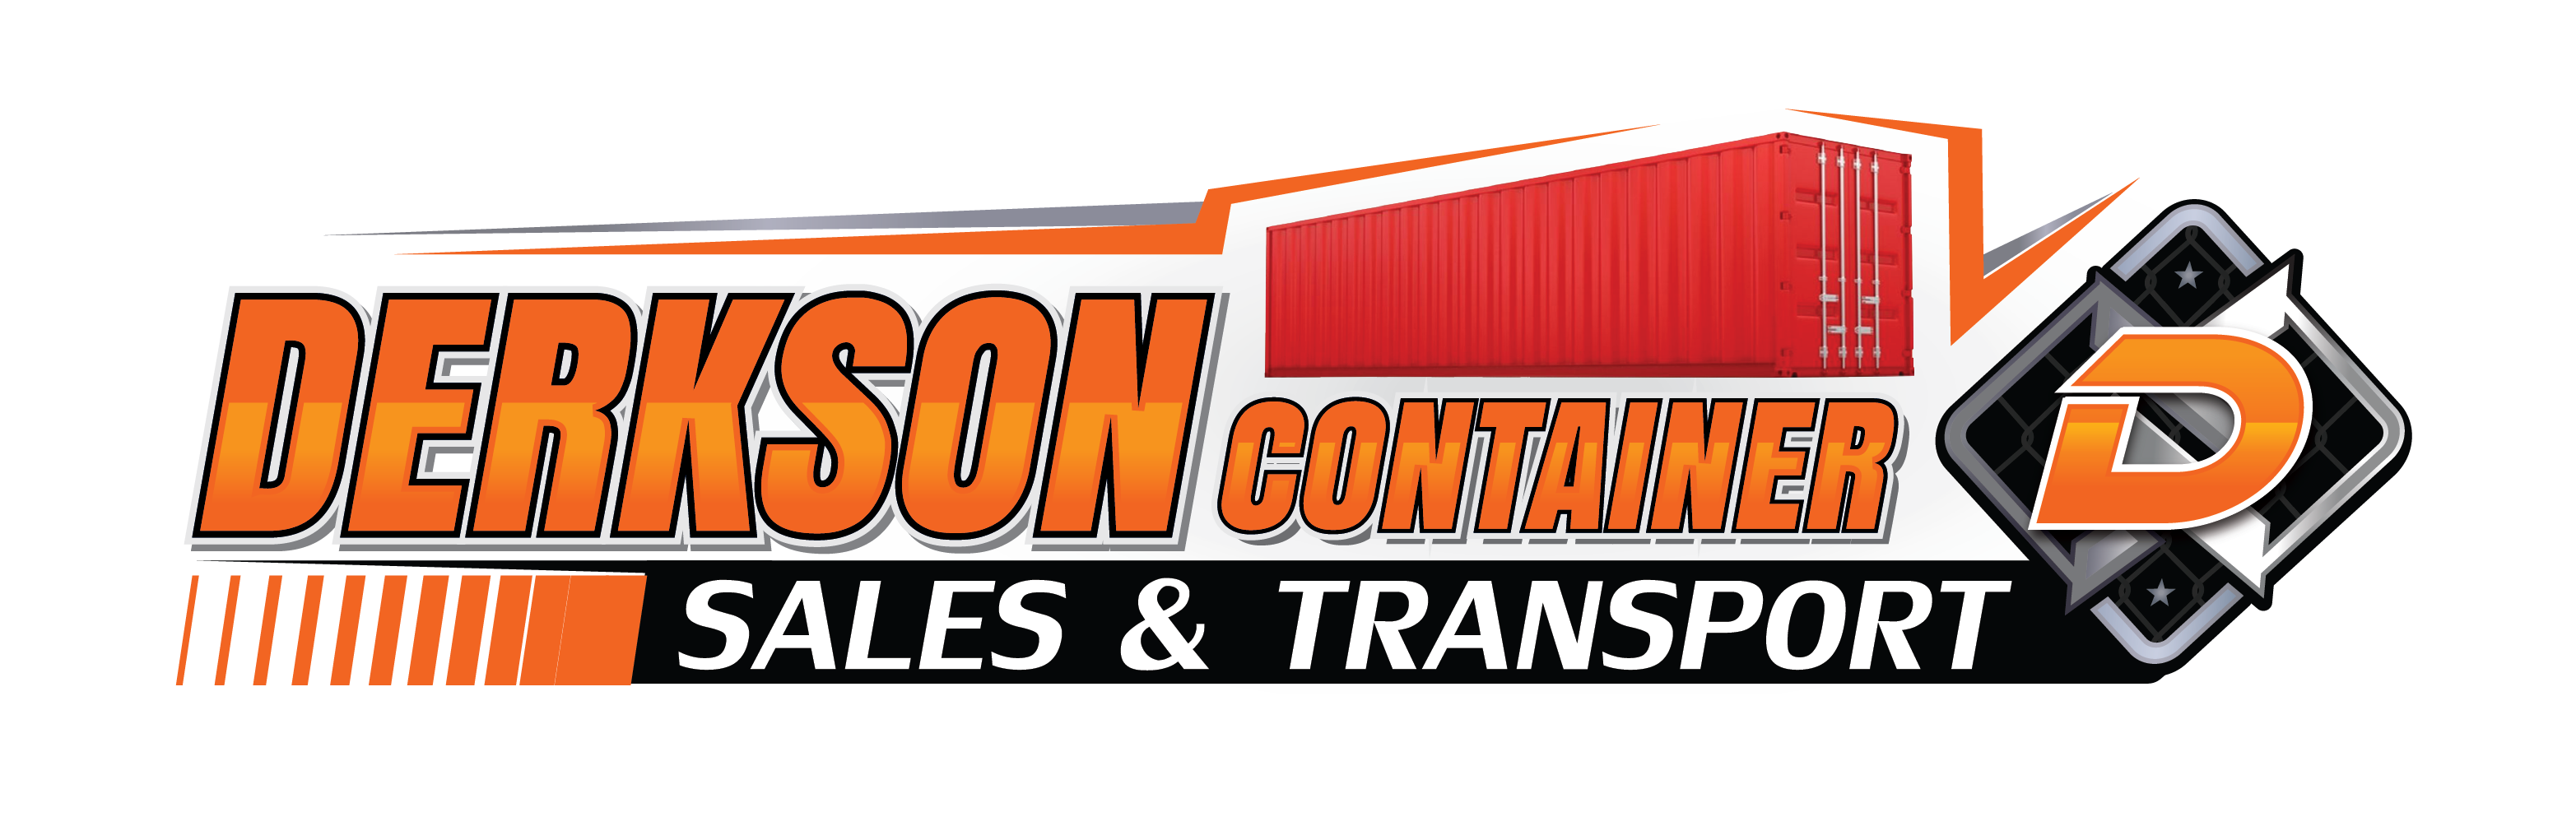 Derkson Container Sales  Transport